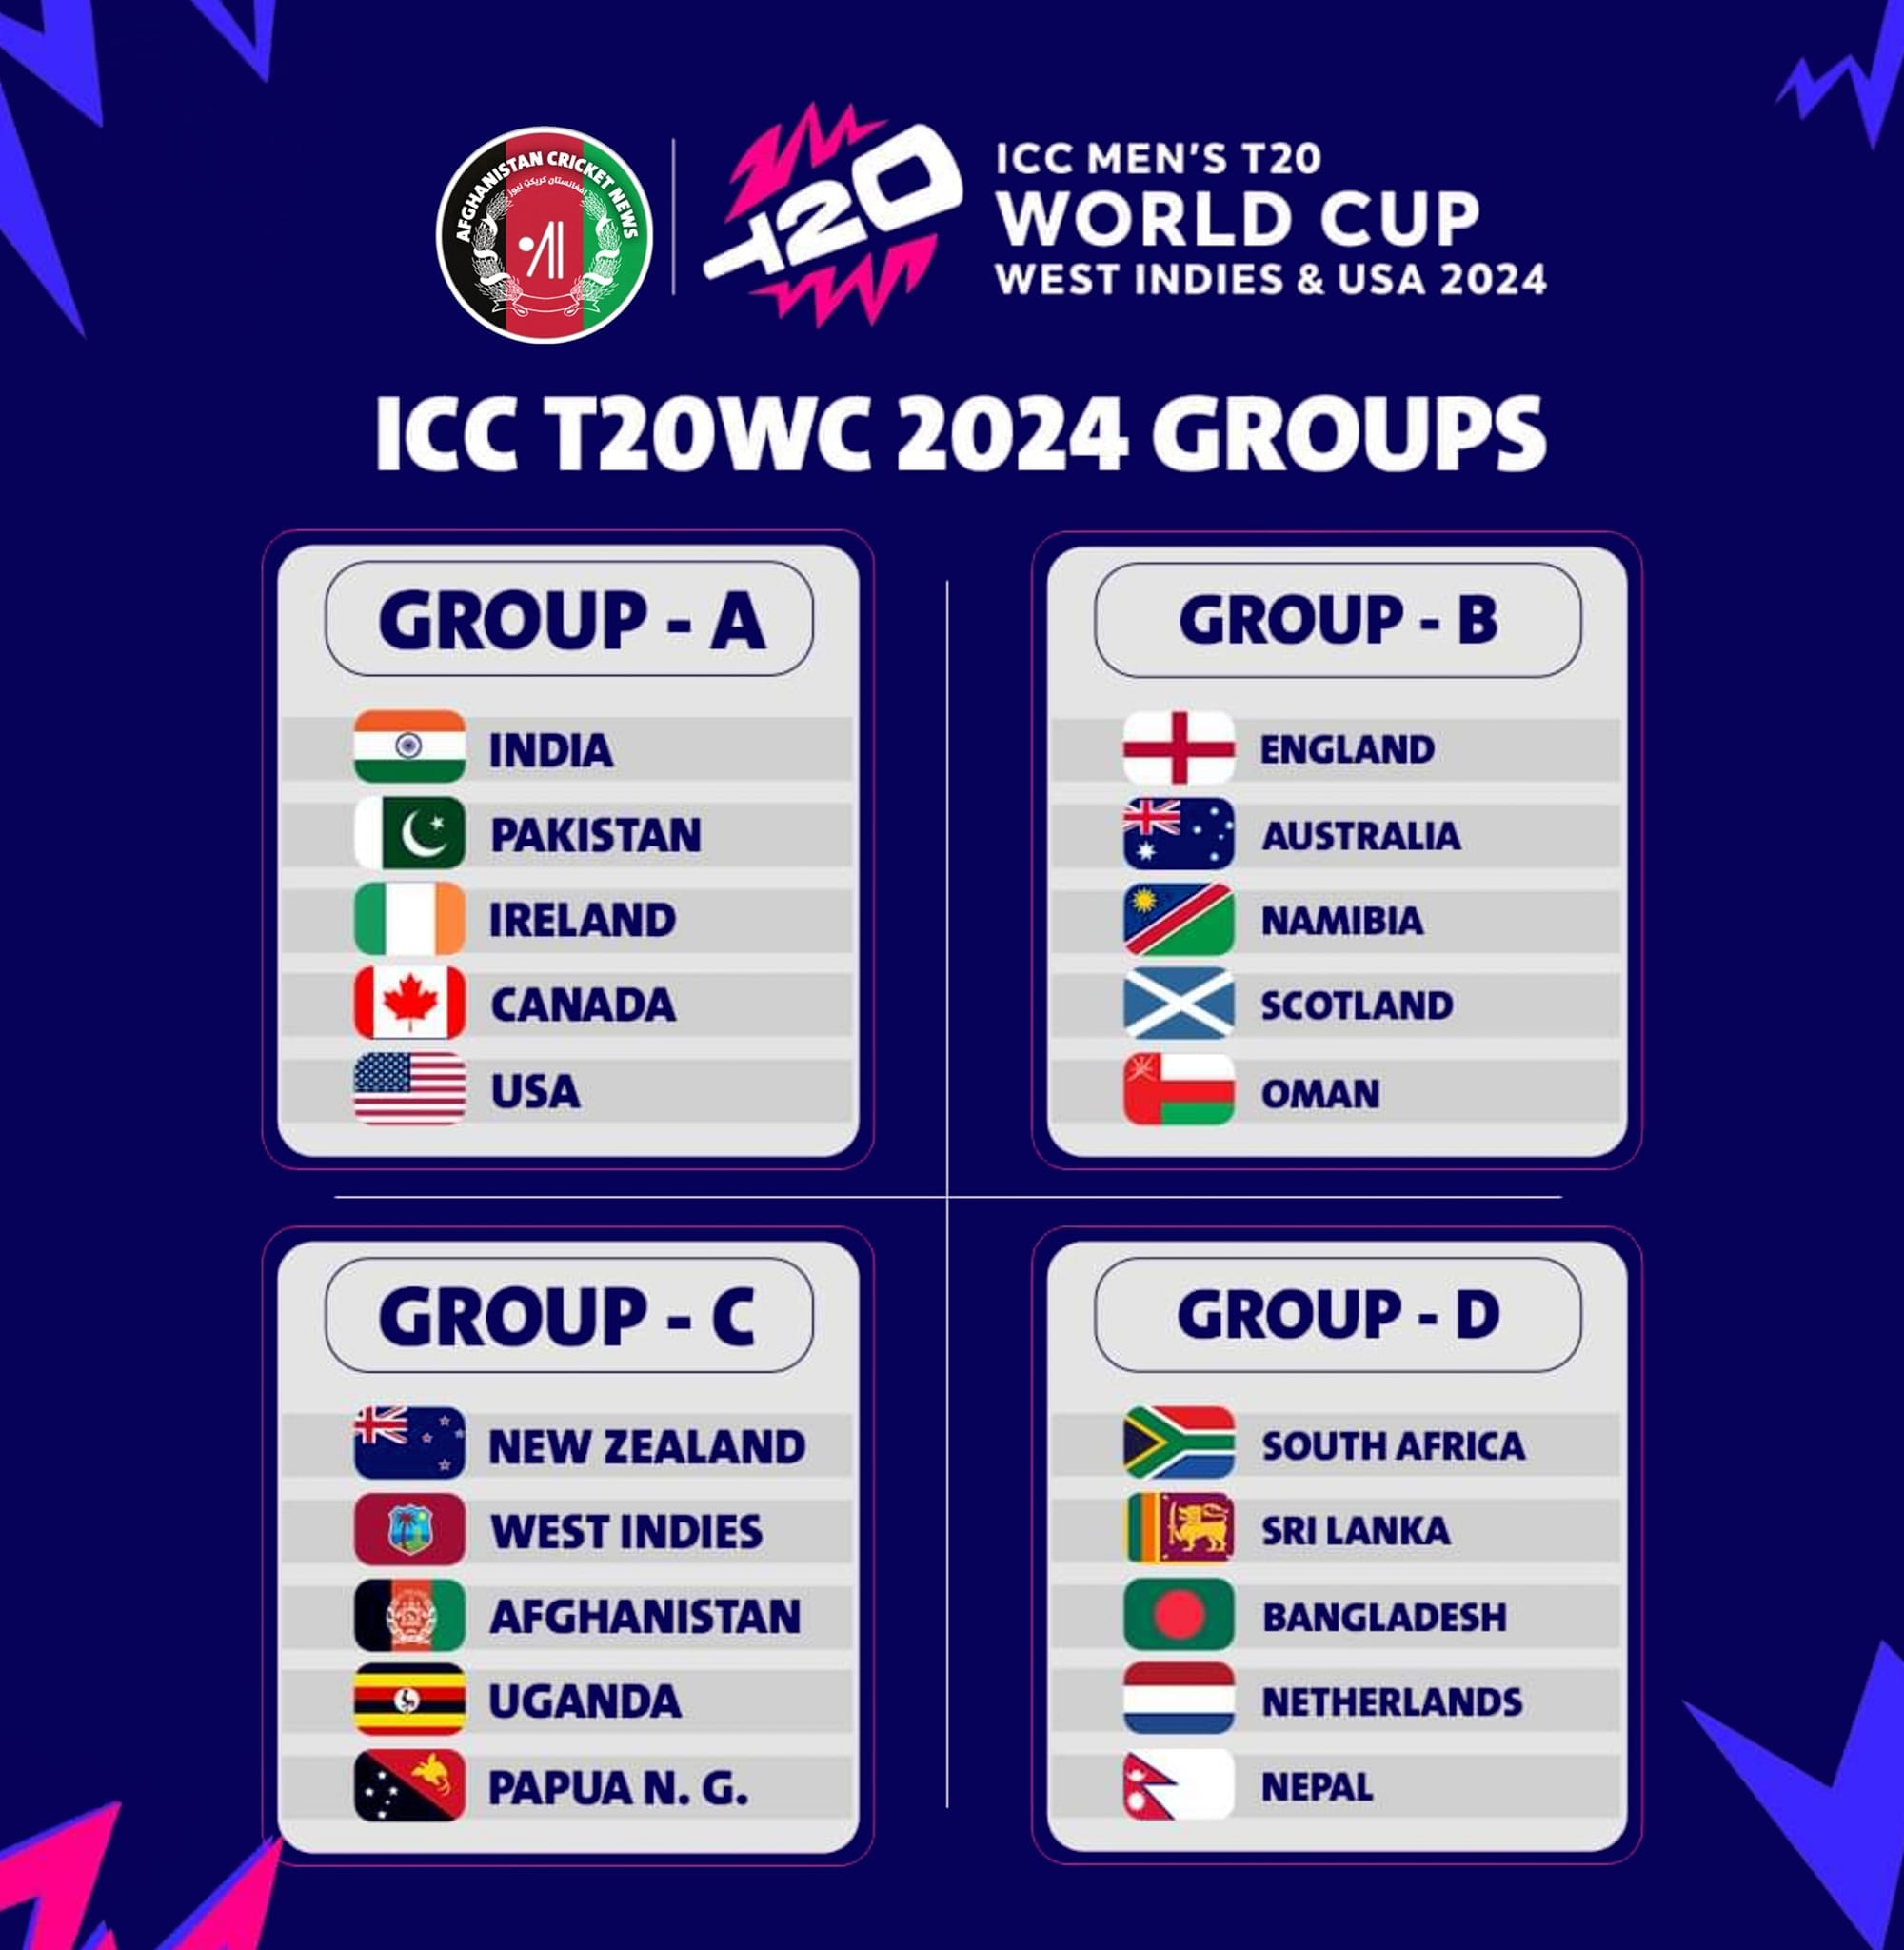 May be an image of text that says "ICC MENS T20 WORLD CUP 2024 GROUPS GROUP A GROUP B C PAKISTAN INDIA IRELAND USA CANADA AUSTRALIA ENGLAND NAMIBIA SCOTLAND OMAN GROUP c GROUP D NEW-ZEALAND NEW- WESTINDIES WEST INDIES UGANDA AFGHANISTAN PNG (၁) SOUTH-AFRICA SIRLANKA BANGLADESH NETHERLANDS NEPAL"